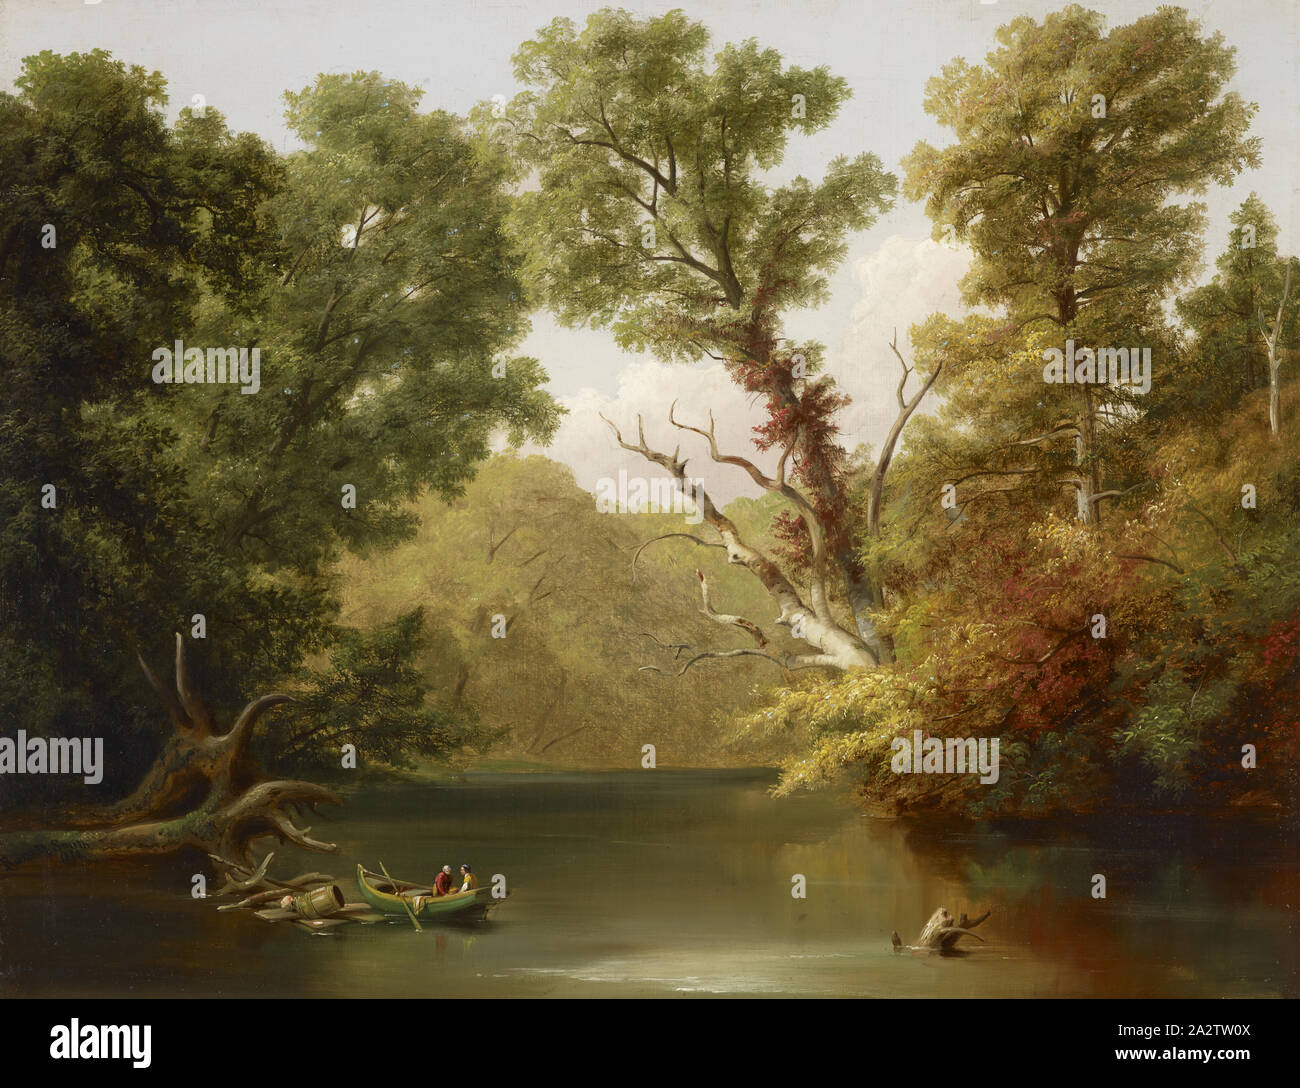 On the Pennypack, Russell Smith (American, 1812-1896), 1880, oil on canvas, 29-1/4 x 37-3/4 in. (canvas) 36-1/2 x 45 x 3-1/4 in. (framed), Signed and dated, l.c.l.: Russell Smith, 1880. Label, handwritten, verso, stretcher, u.c.: On the Pennypack, Russell Smith, To be called for Label, verso, stretcher, u.c.: Loaned to the Pennsylvania Academy of the Fine Arts, by Russell Smith, Register 1880 Inscribed, verso, stretcher, l.r.: Edgehill[?], Monty[?] Co. Pa., American Painting and Sculpture to 1945 Stock Photo